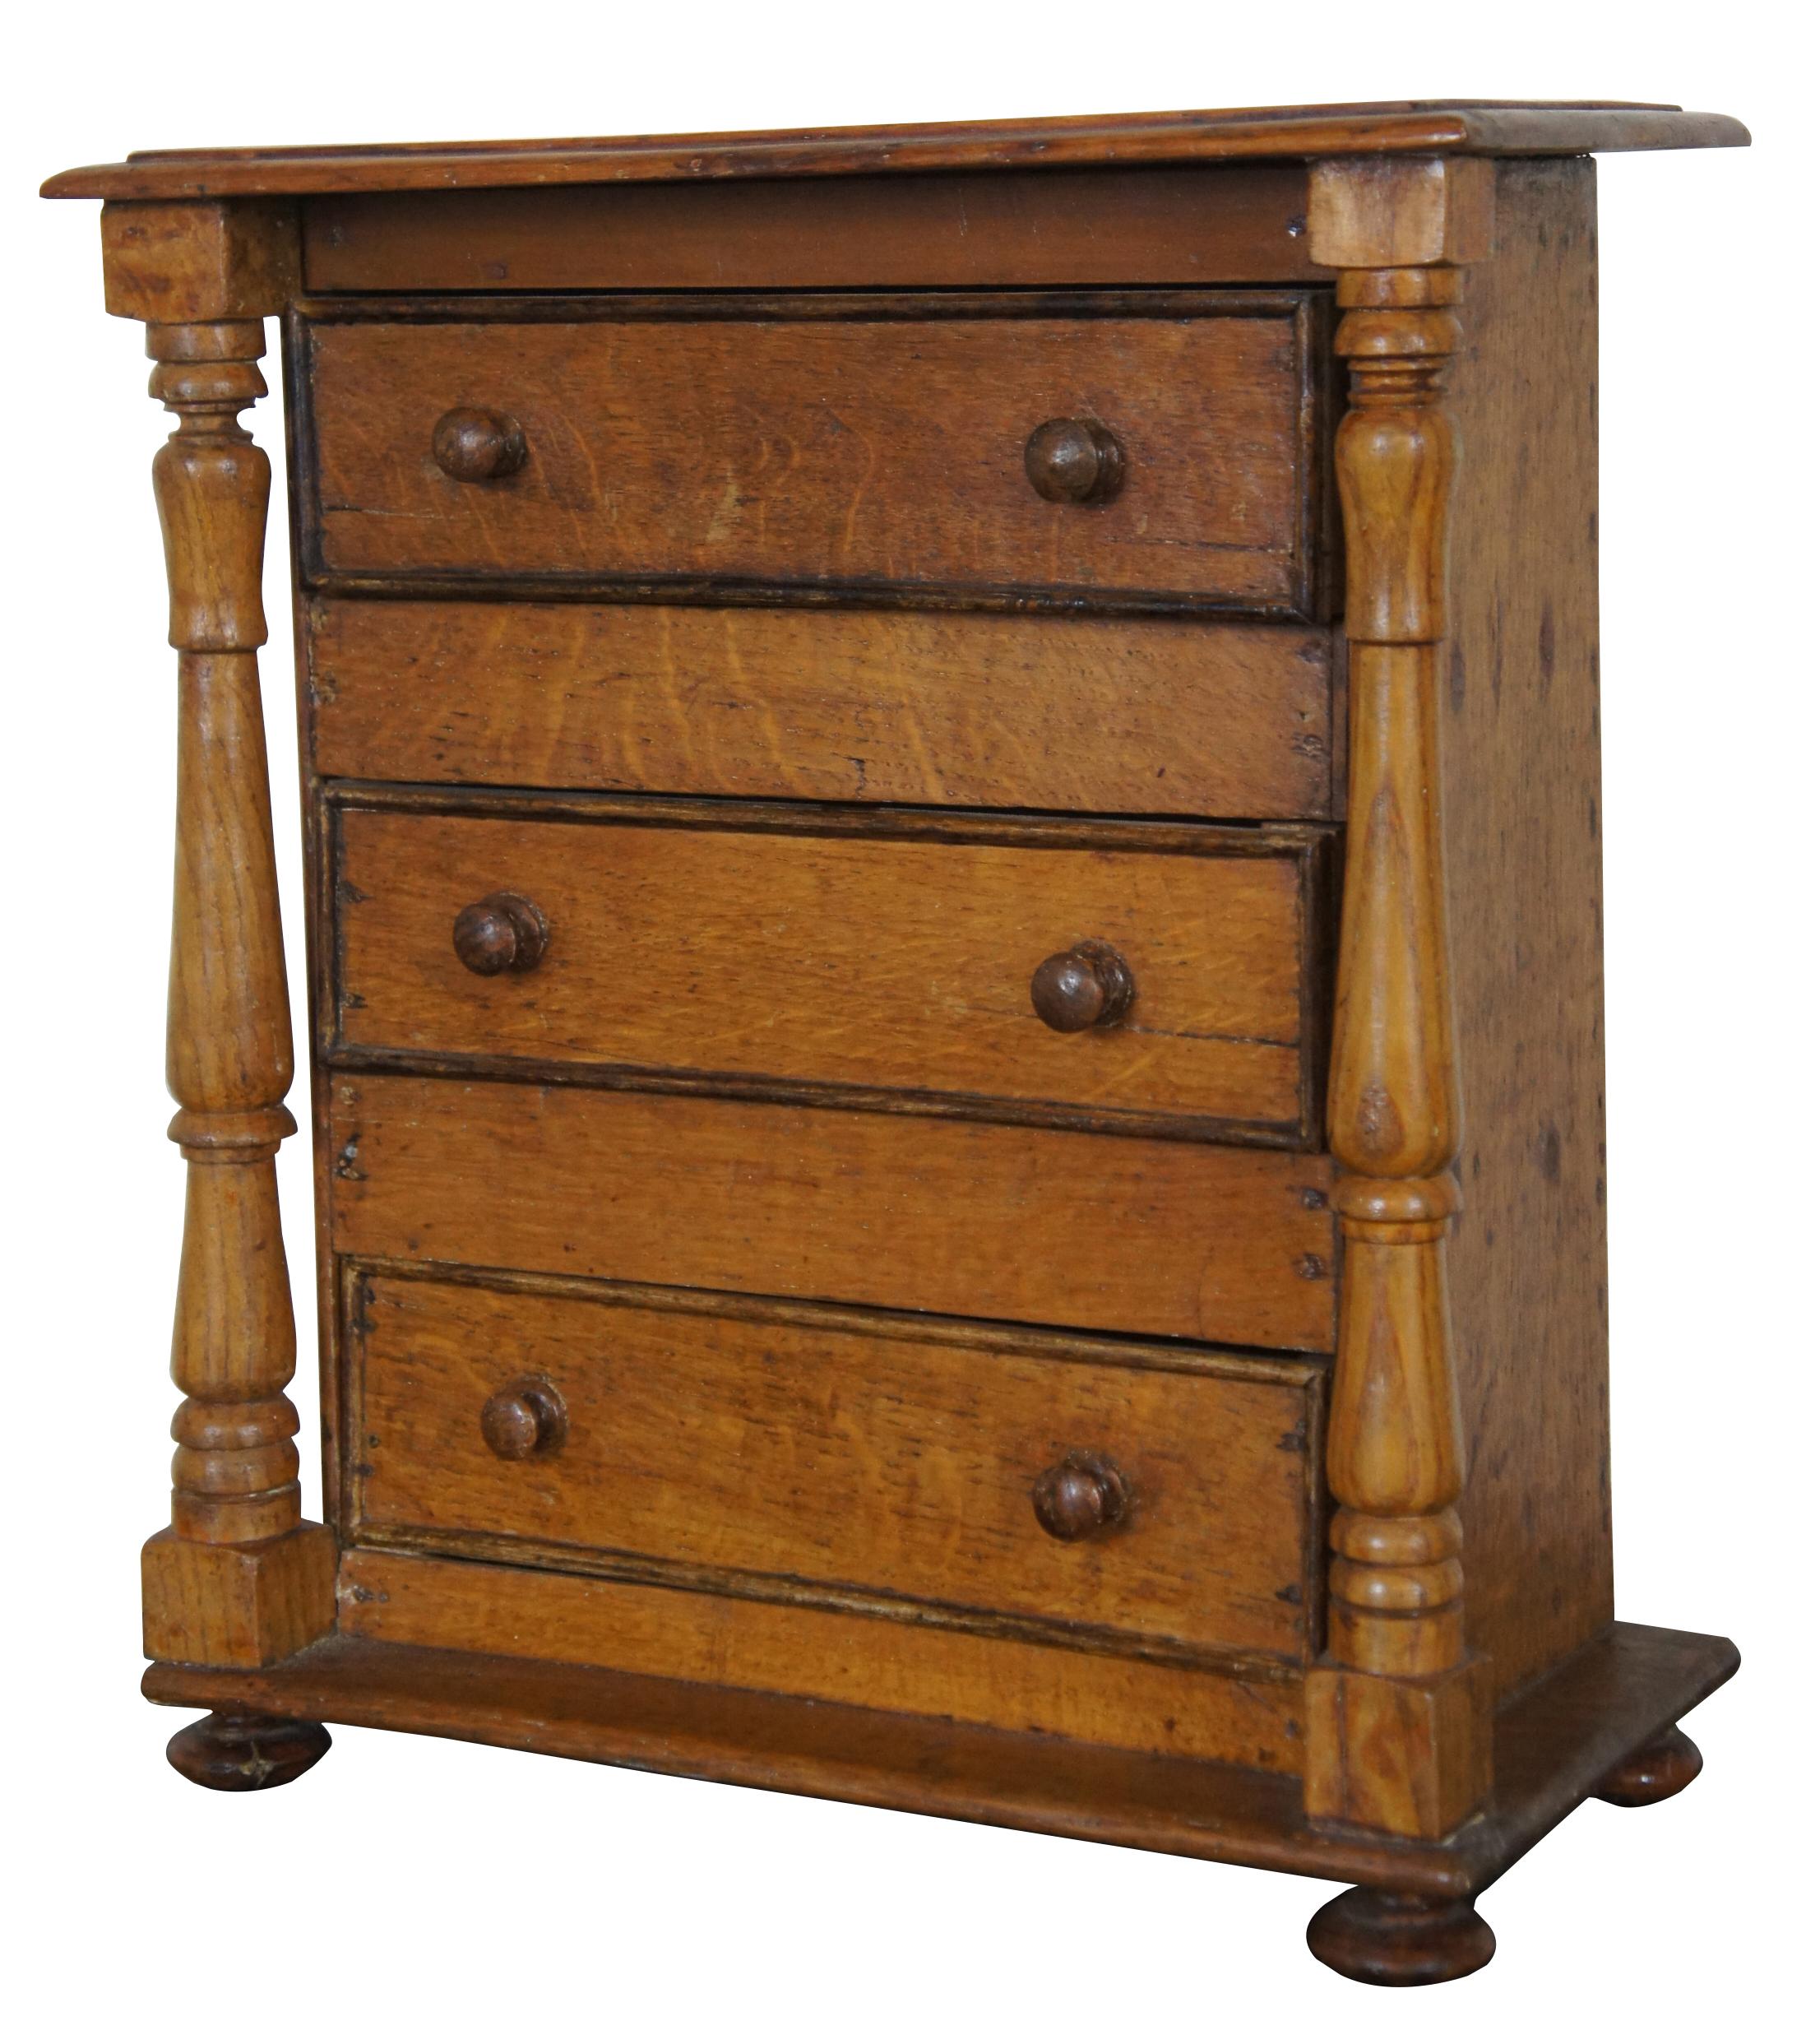 American Empire miniature salesman sample tallboy chest of drawers, circa 1850s. Made from quartersawn oak and pine with three drawers, turned posts and bun feet.
 